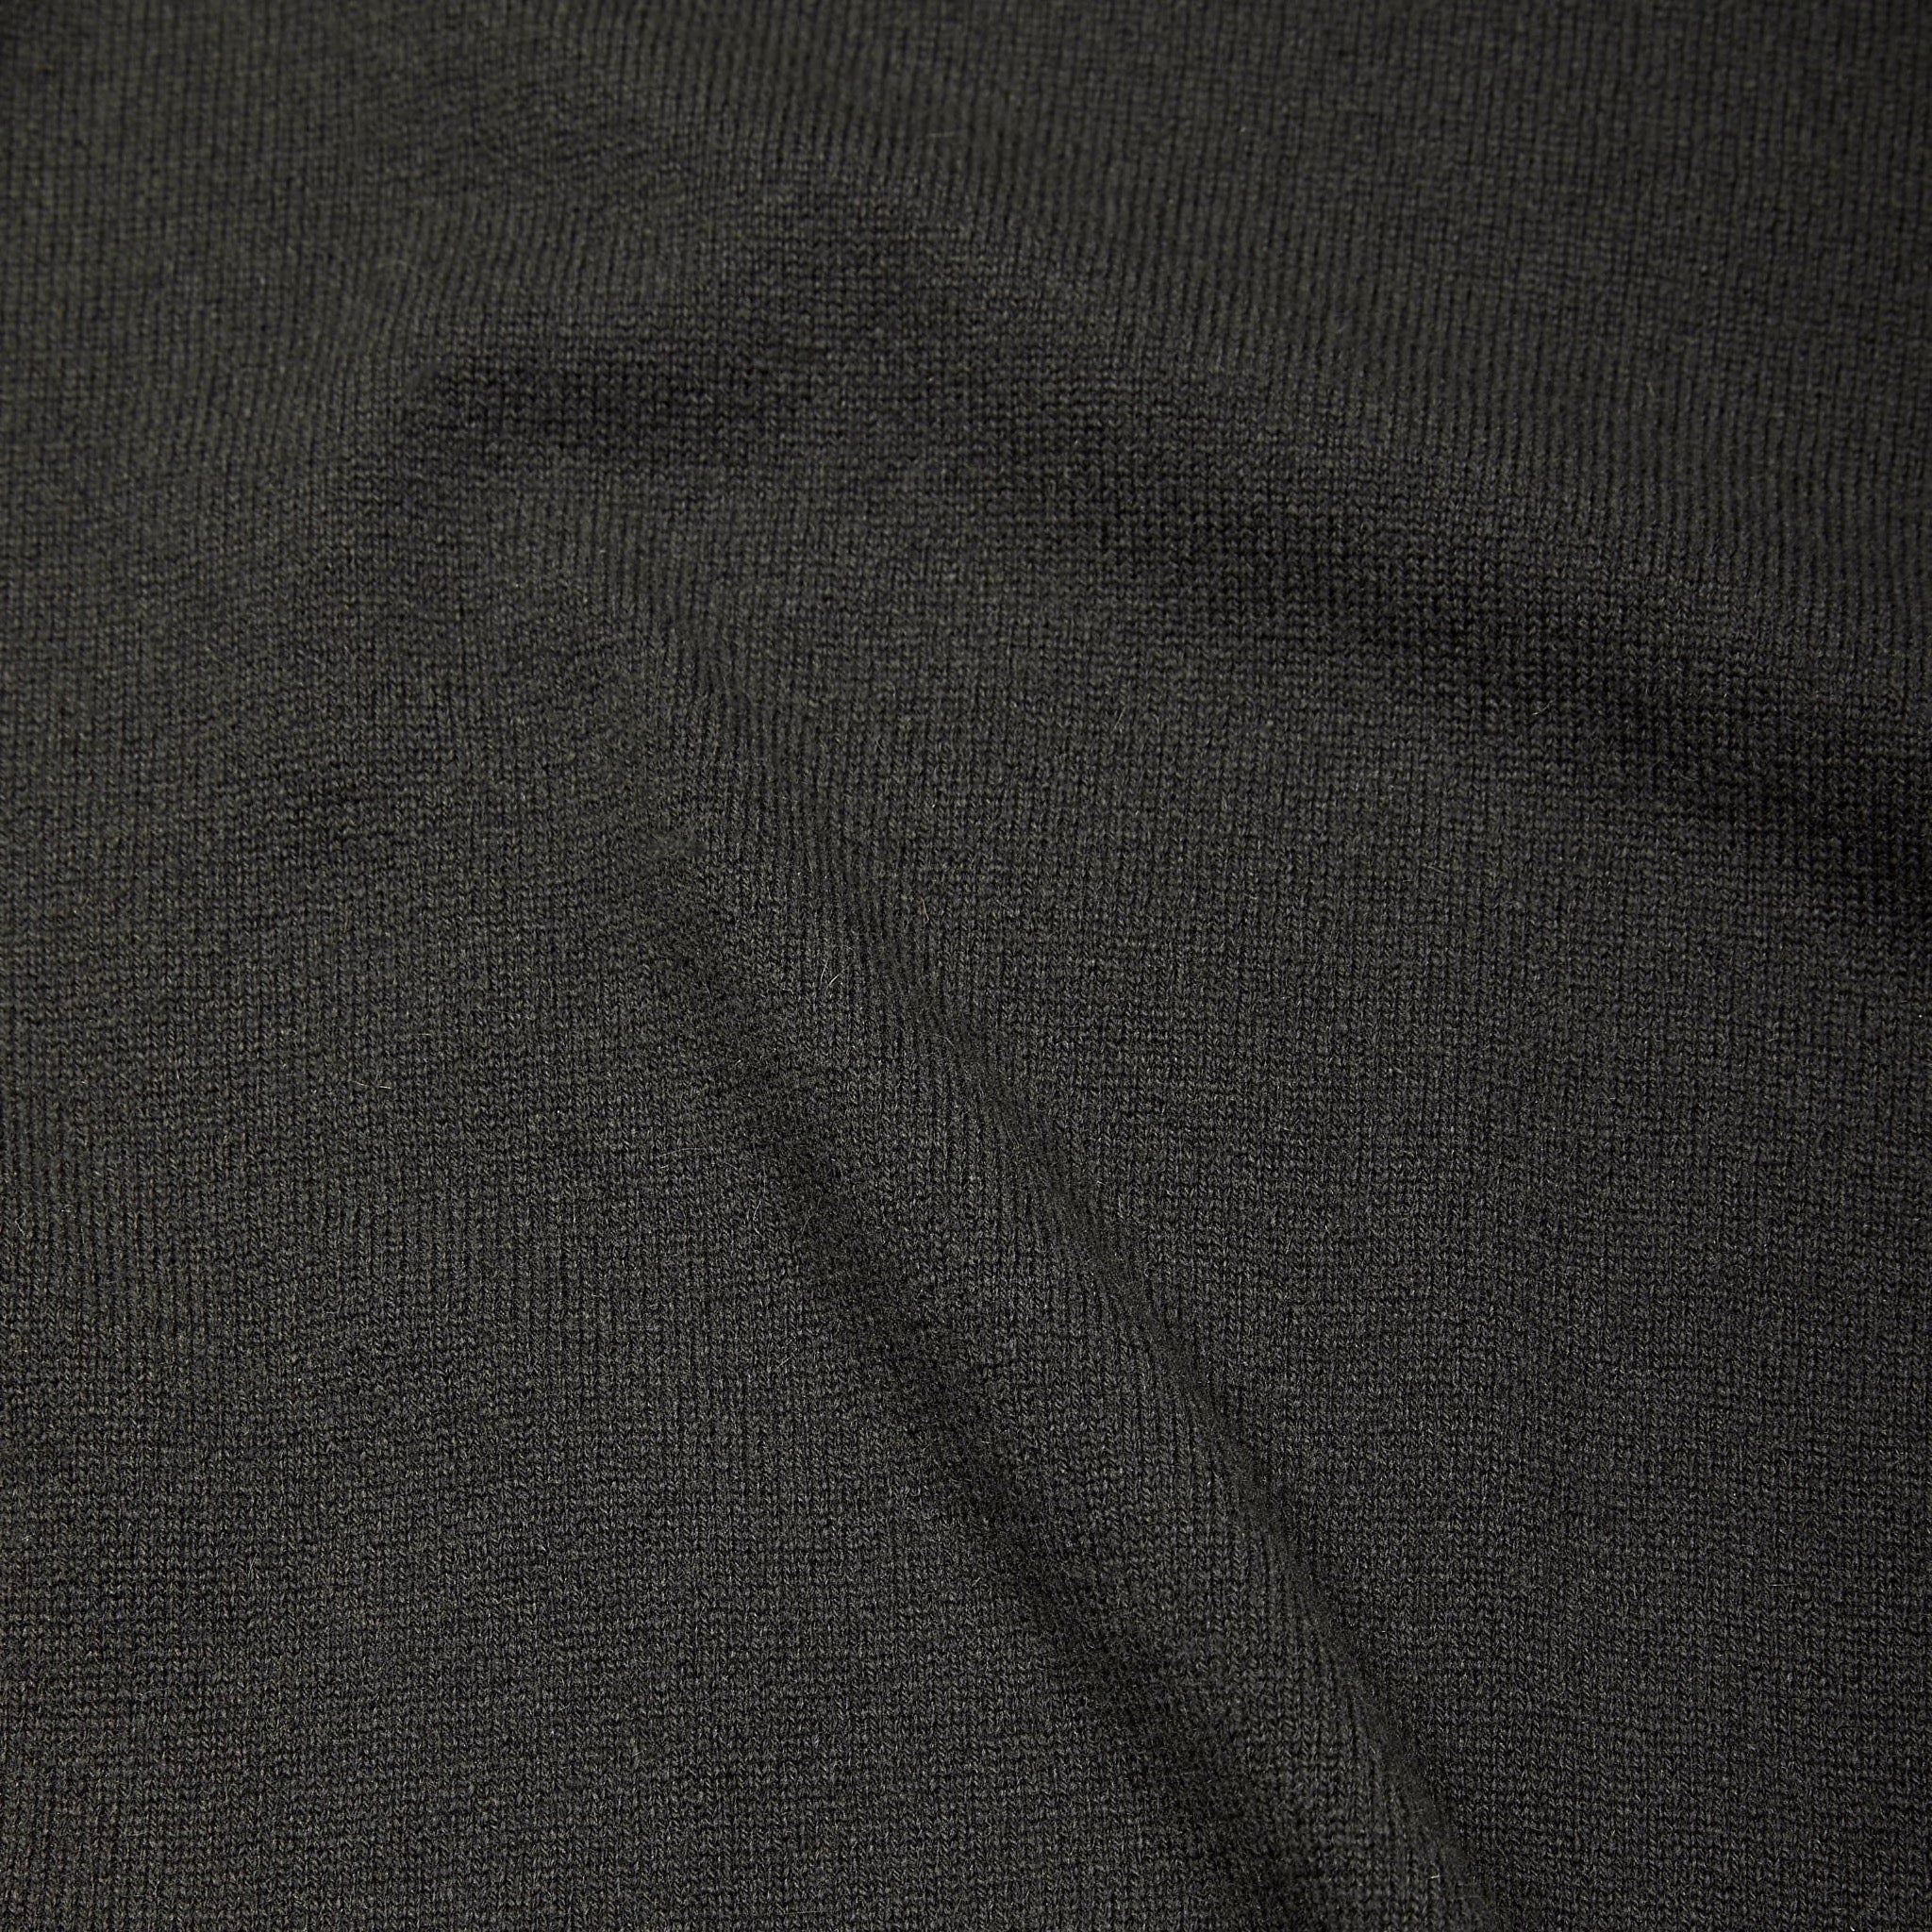 Cashmere polo shirt in dark olive